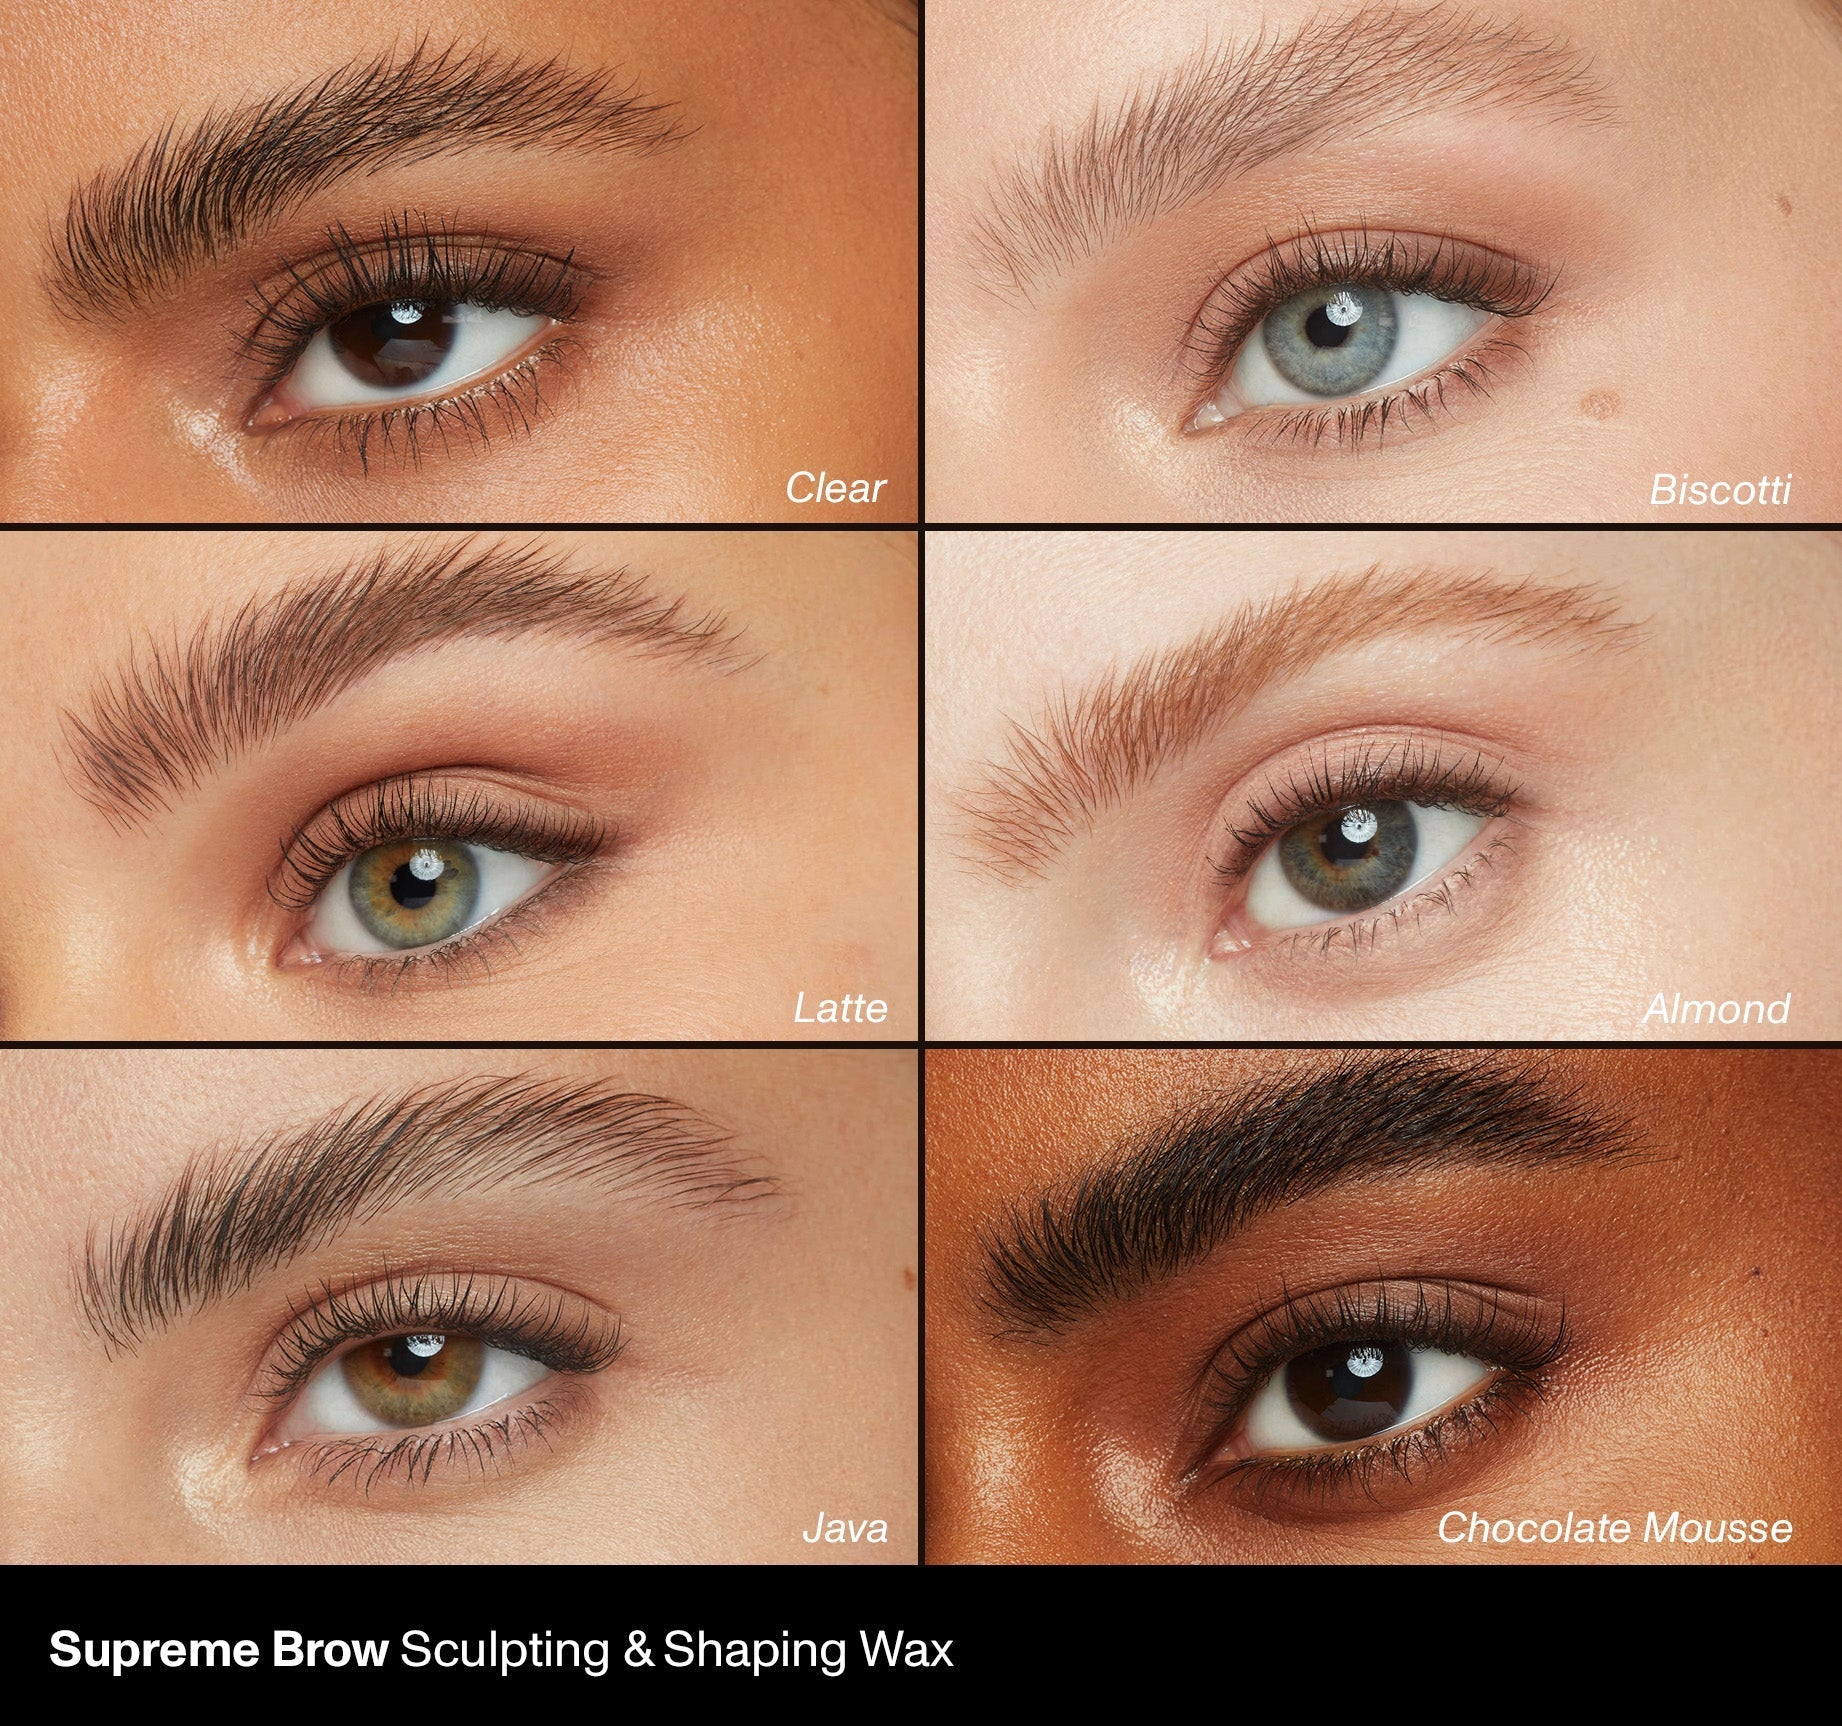 Supreme Brow Sculpting And Shaping Wax - Almond - Image 3